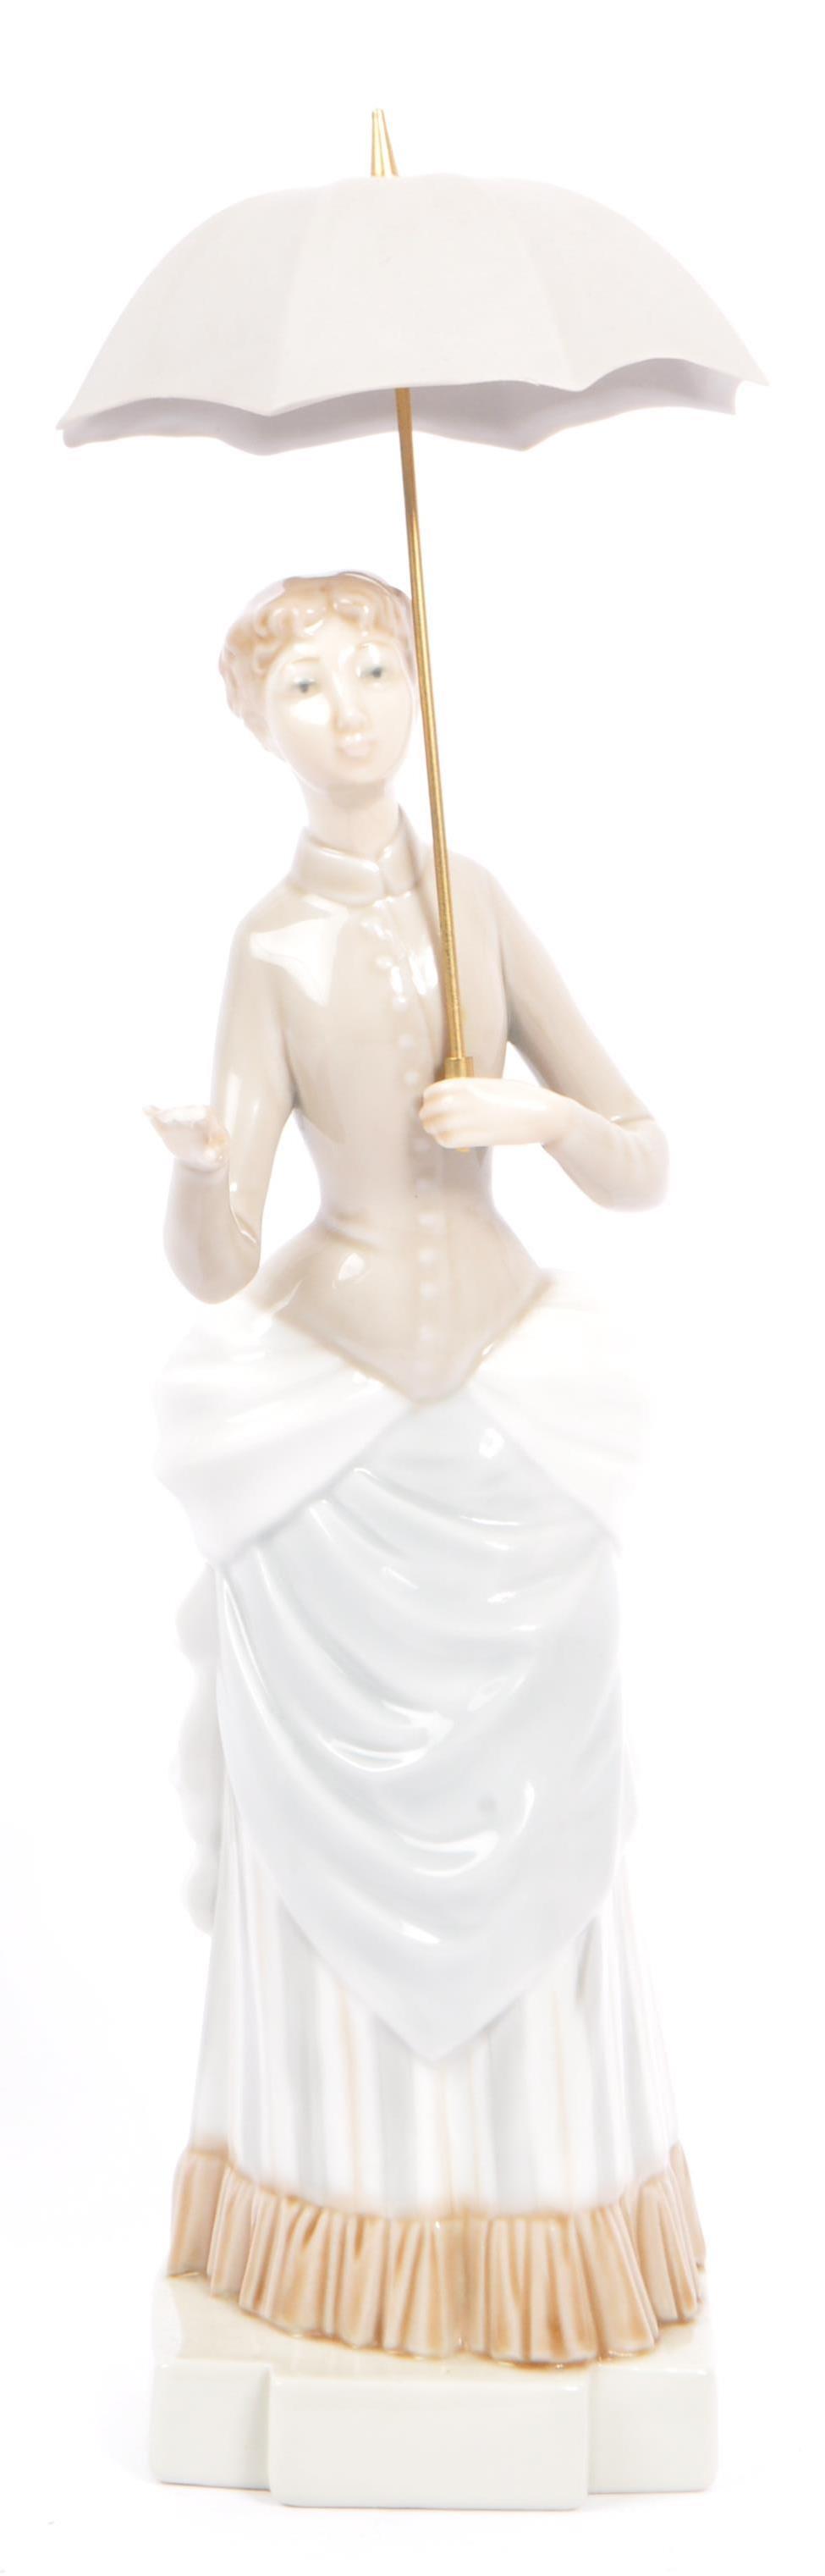 NAO FOR LLADRO - SPANISH PORCELAIN TABLEWARE FIGURES - Image 6 of 8